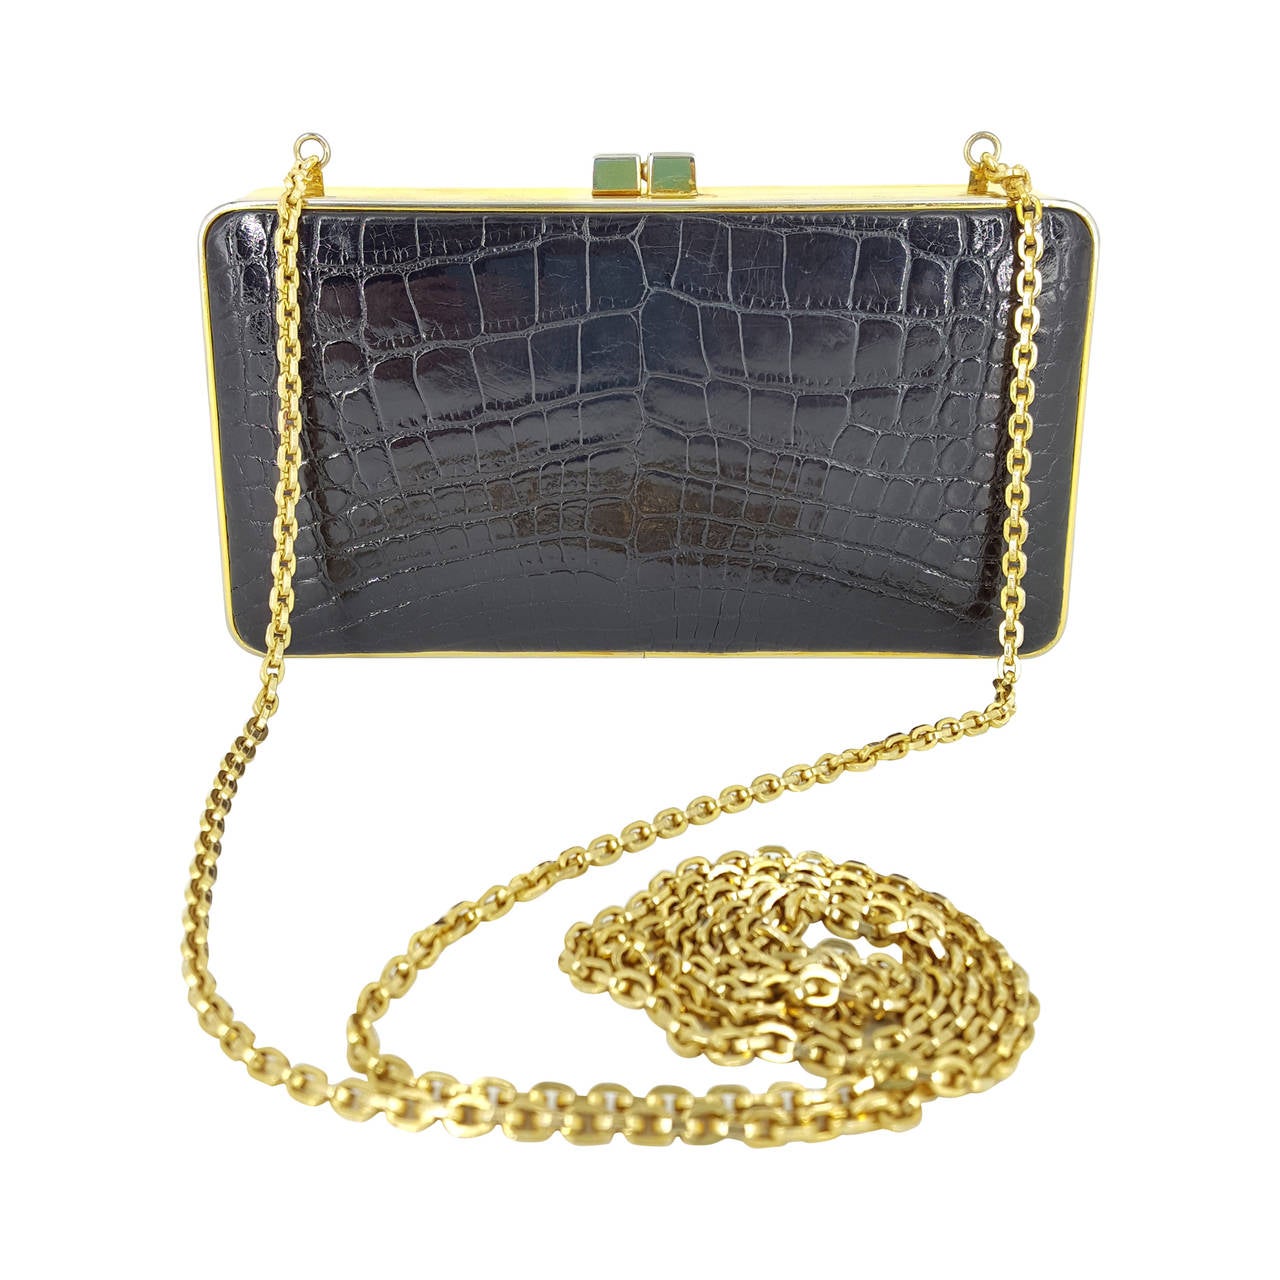 Judith Leiber Shiney Black Alligator Evening Bag/Clutch With Gold Chain. For Sale